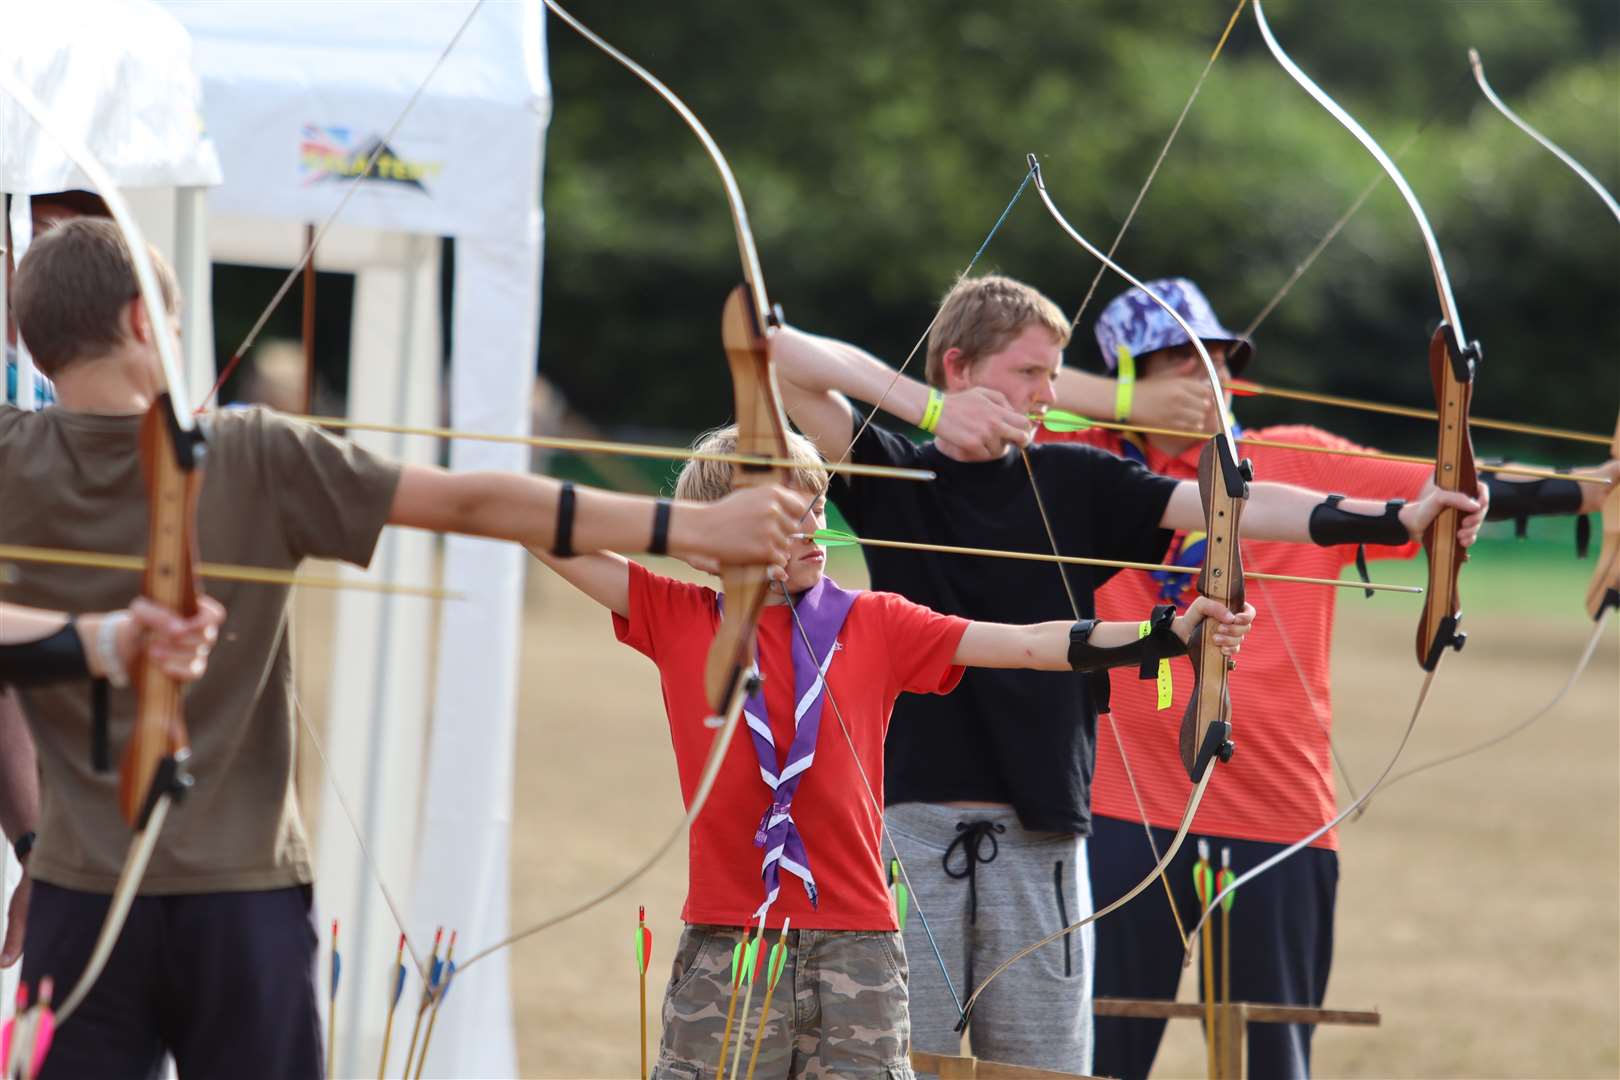 The Scouts got to try their hand at archery